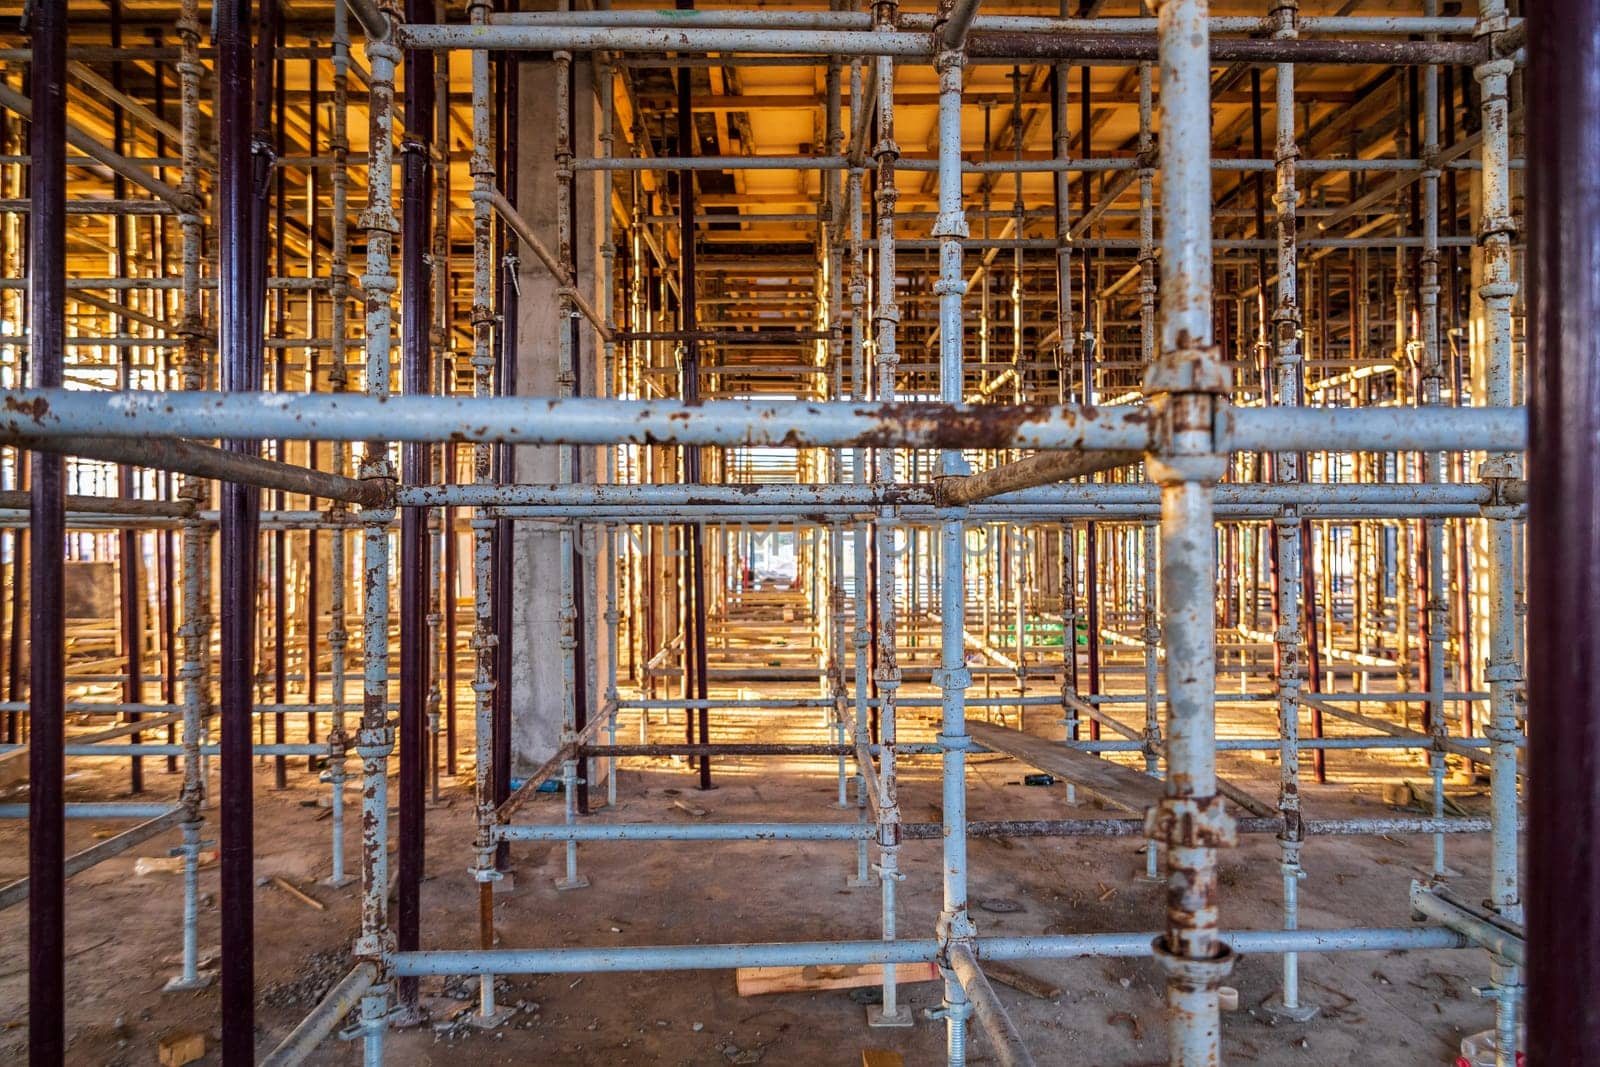 The space of the entire floor is filled with scaffolding to fill the floor with a single contour.